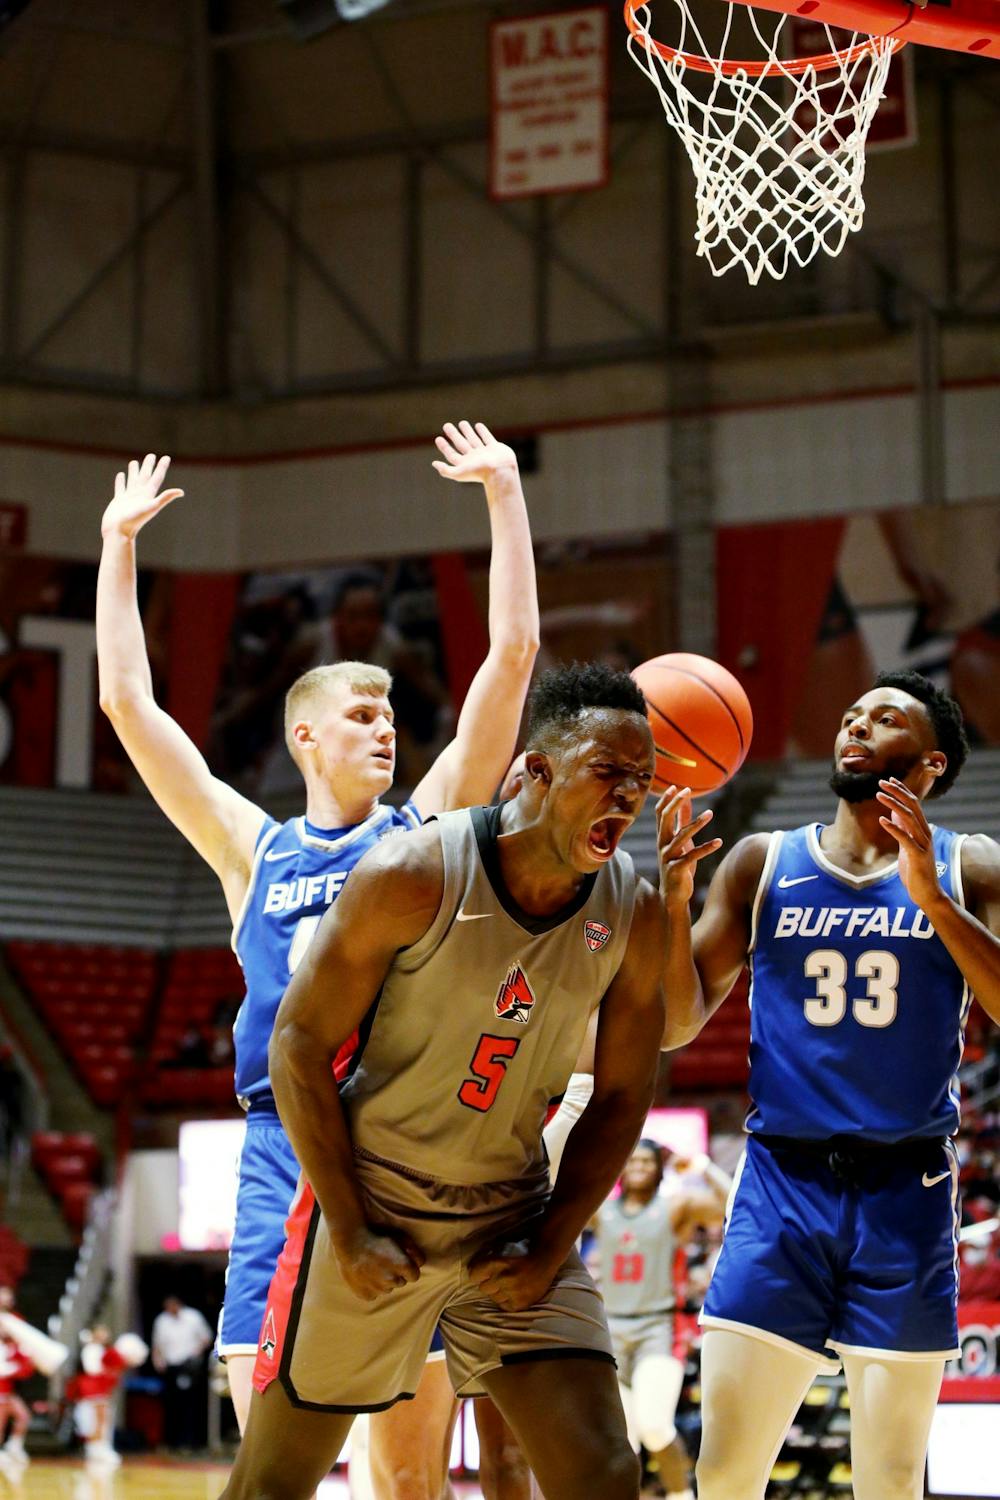 Freshman center Payton Sparks (5) celebrates his layup against Buffalo on Jan. 14, 2022, at Worthen Arena in Muncie, IN. Sparks scored 18 points during the game. Amber Pietz, DN